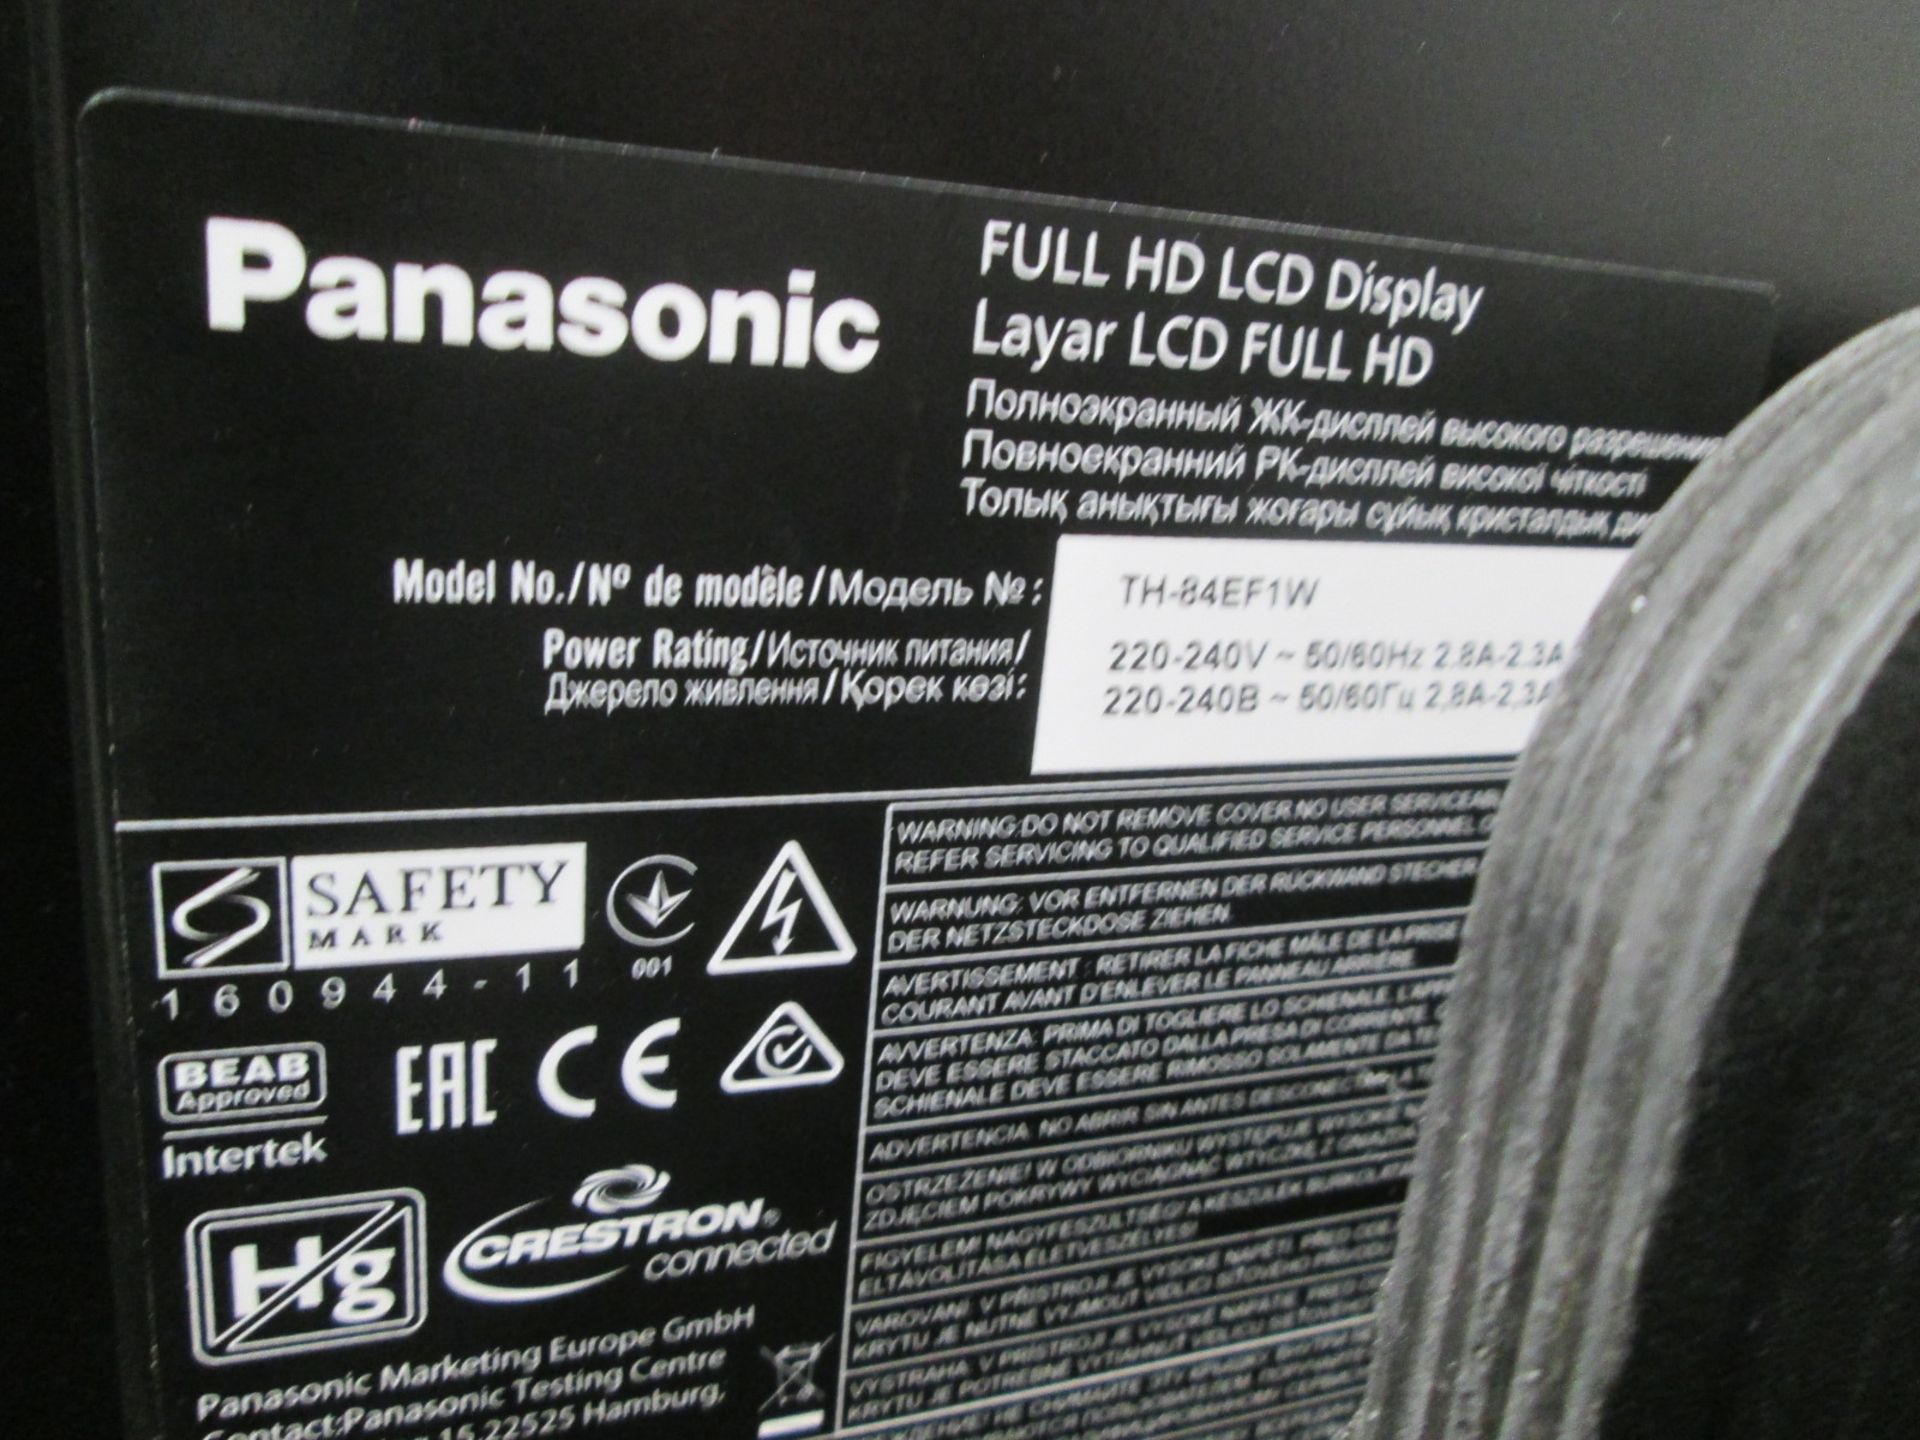 Panasonic 84" Full HD LCD Colour Monitor, Model TH84EF, S/N XE6631905, YOM 2016, In flight case with - Image 5 of 8